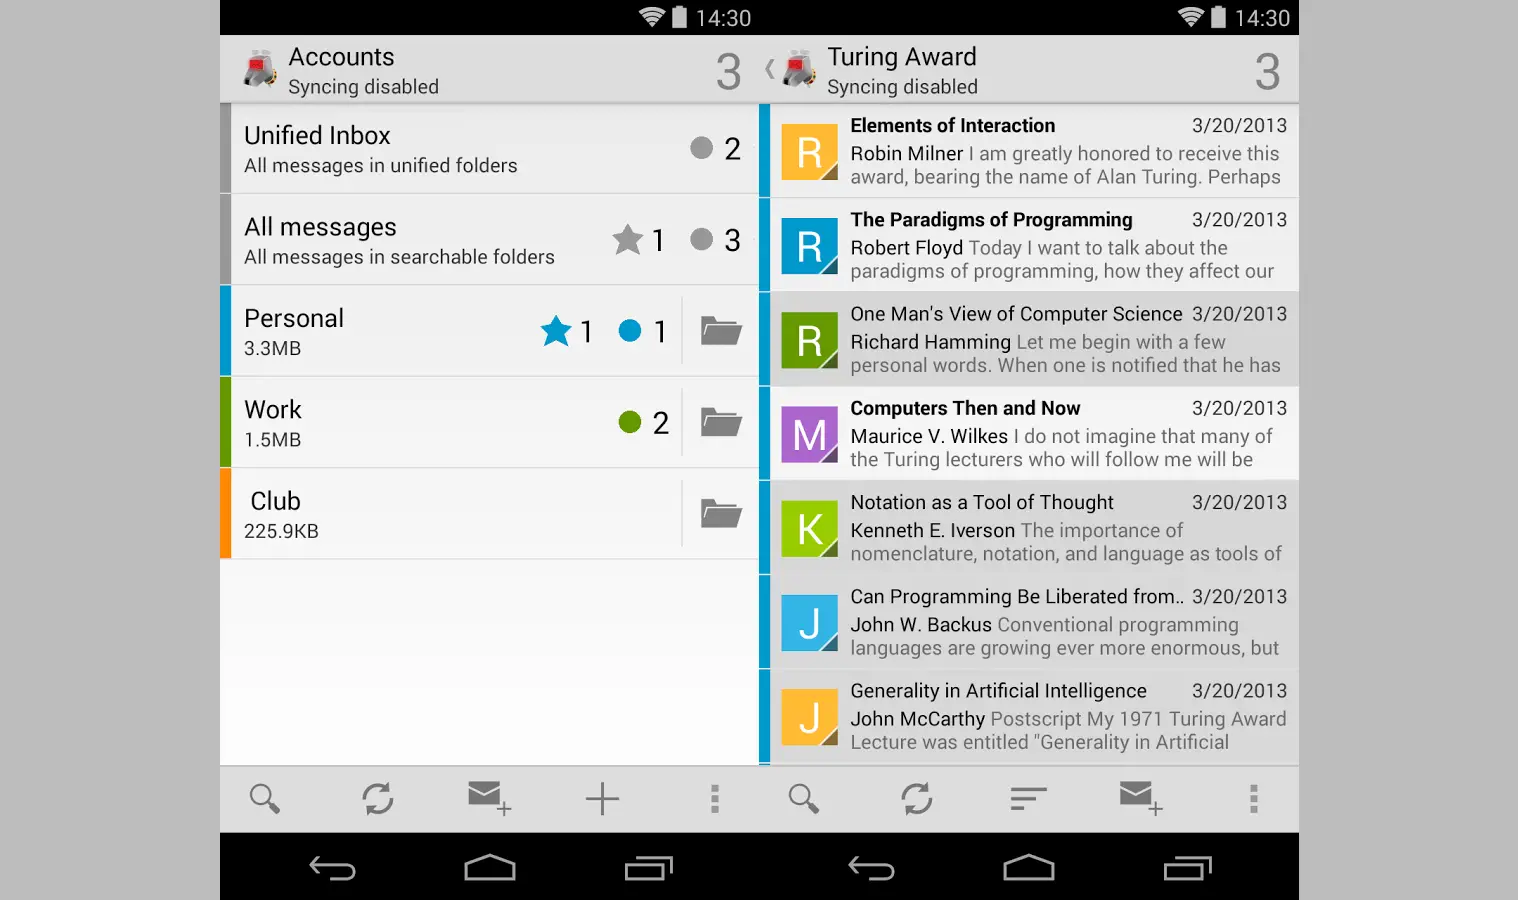 Messages search. Почтовое приложение для андроид. K-9 mail. Mail приложение андроид. Приложение Android mail client для Android 8.0.0.